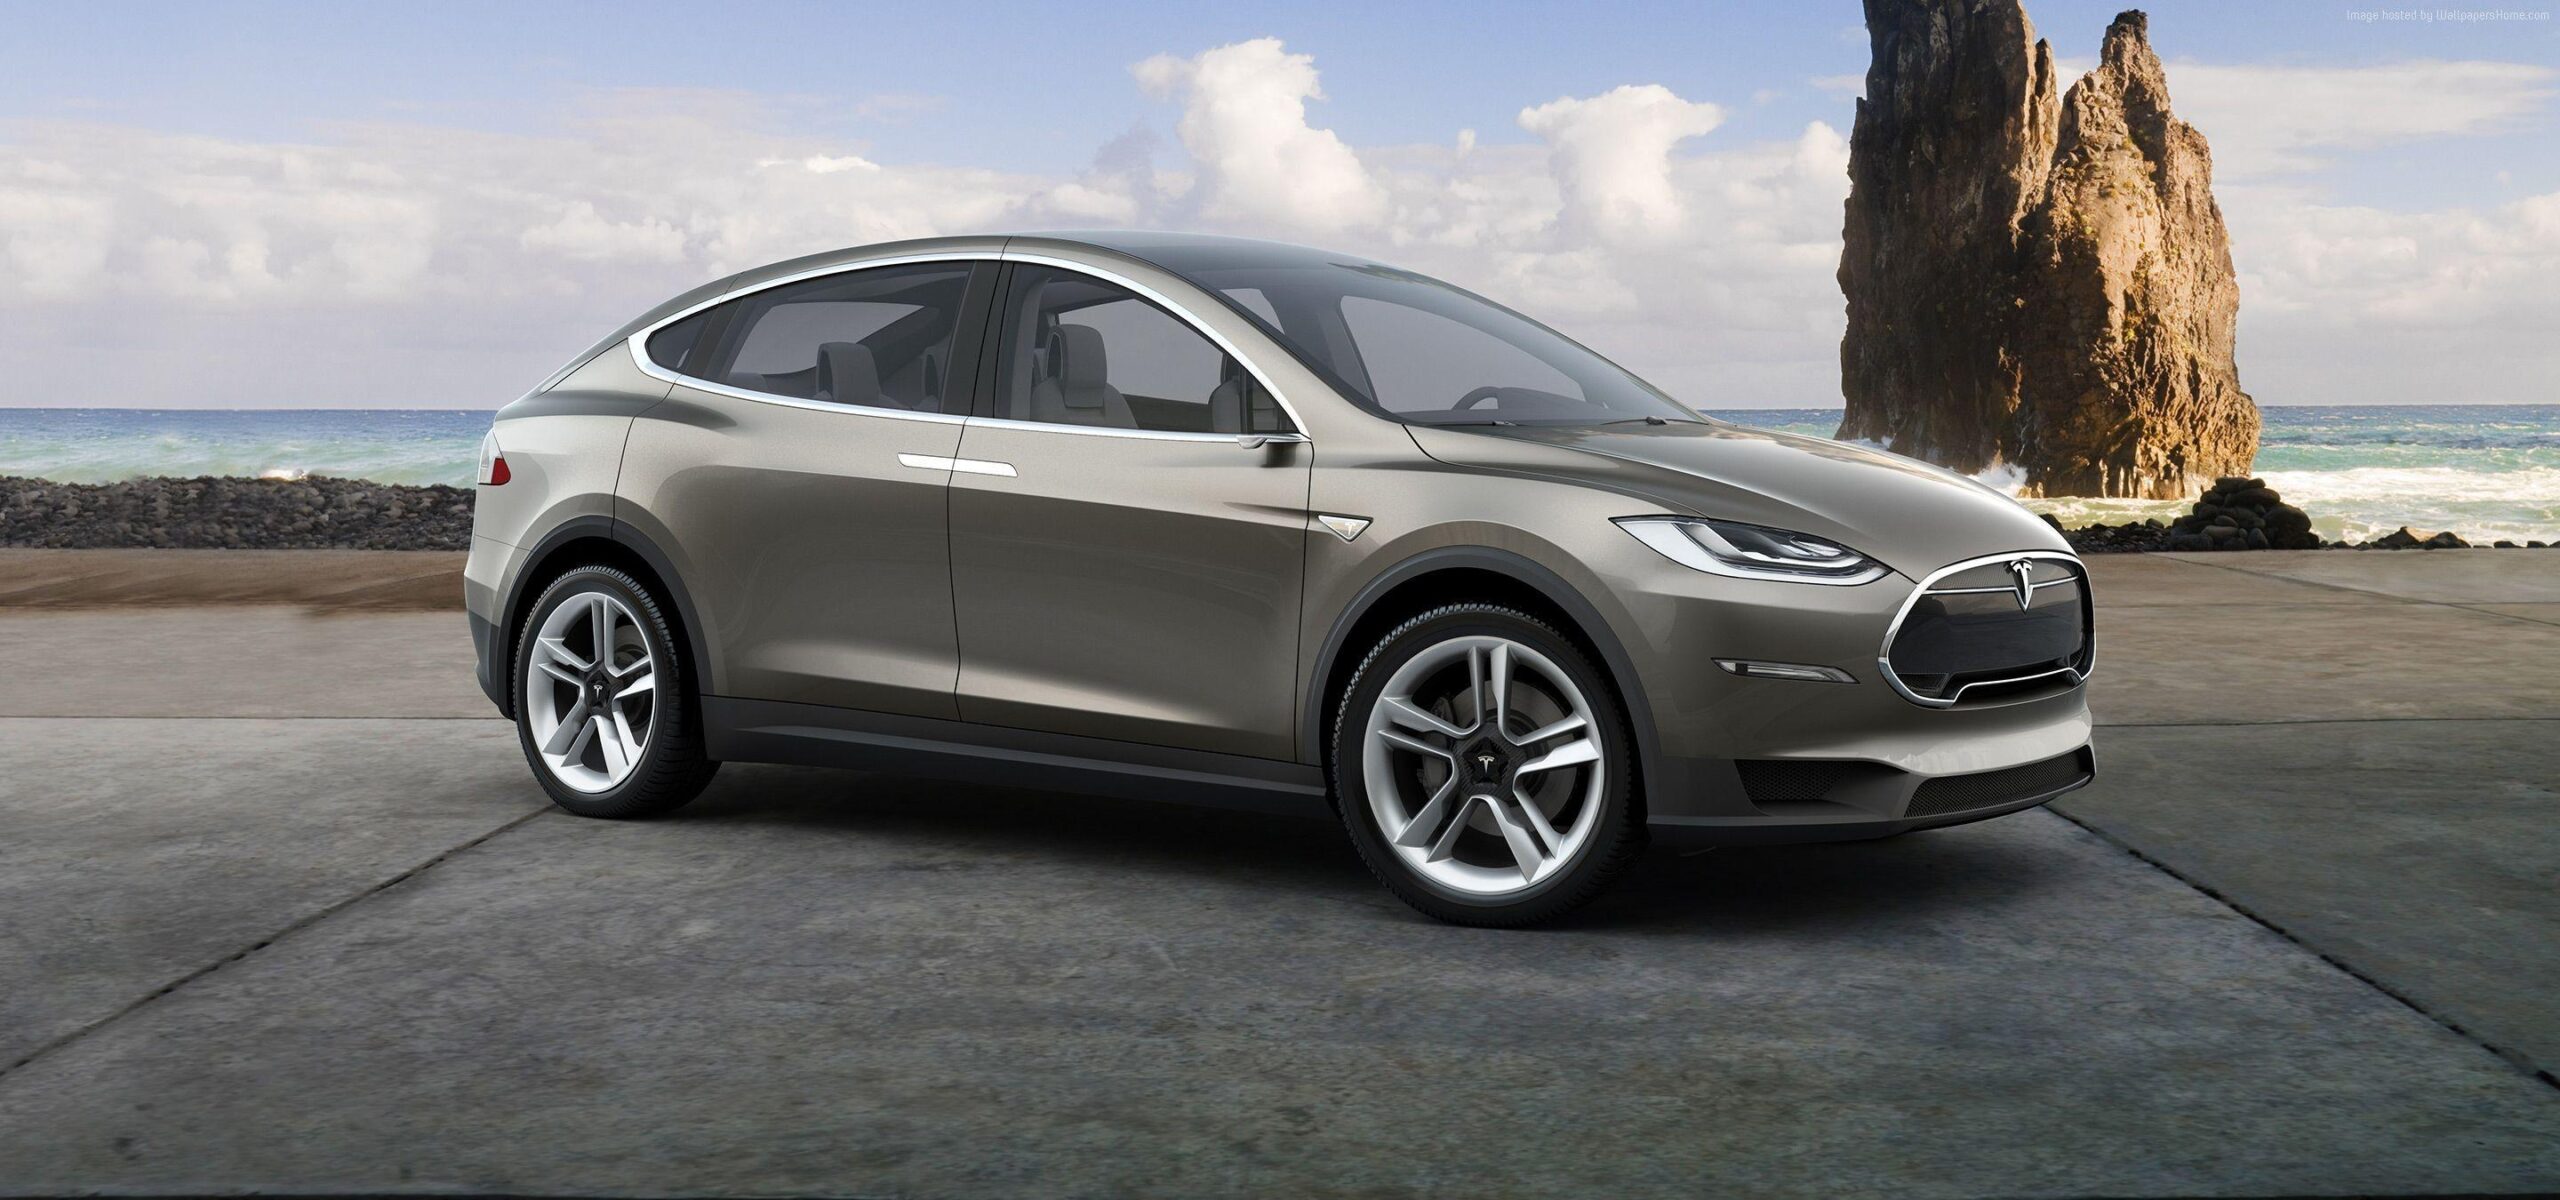 Wallpapers Tesla model x, electric cars, suv, , Cars & Bikes